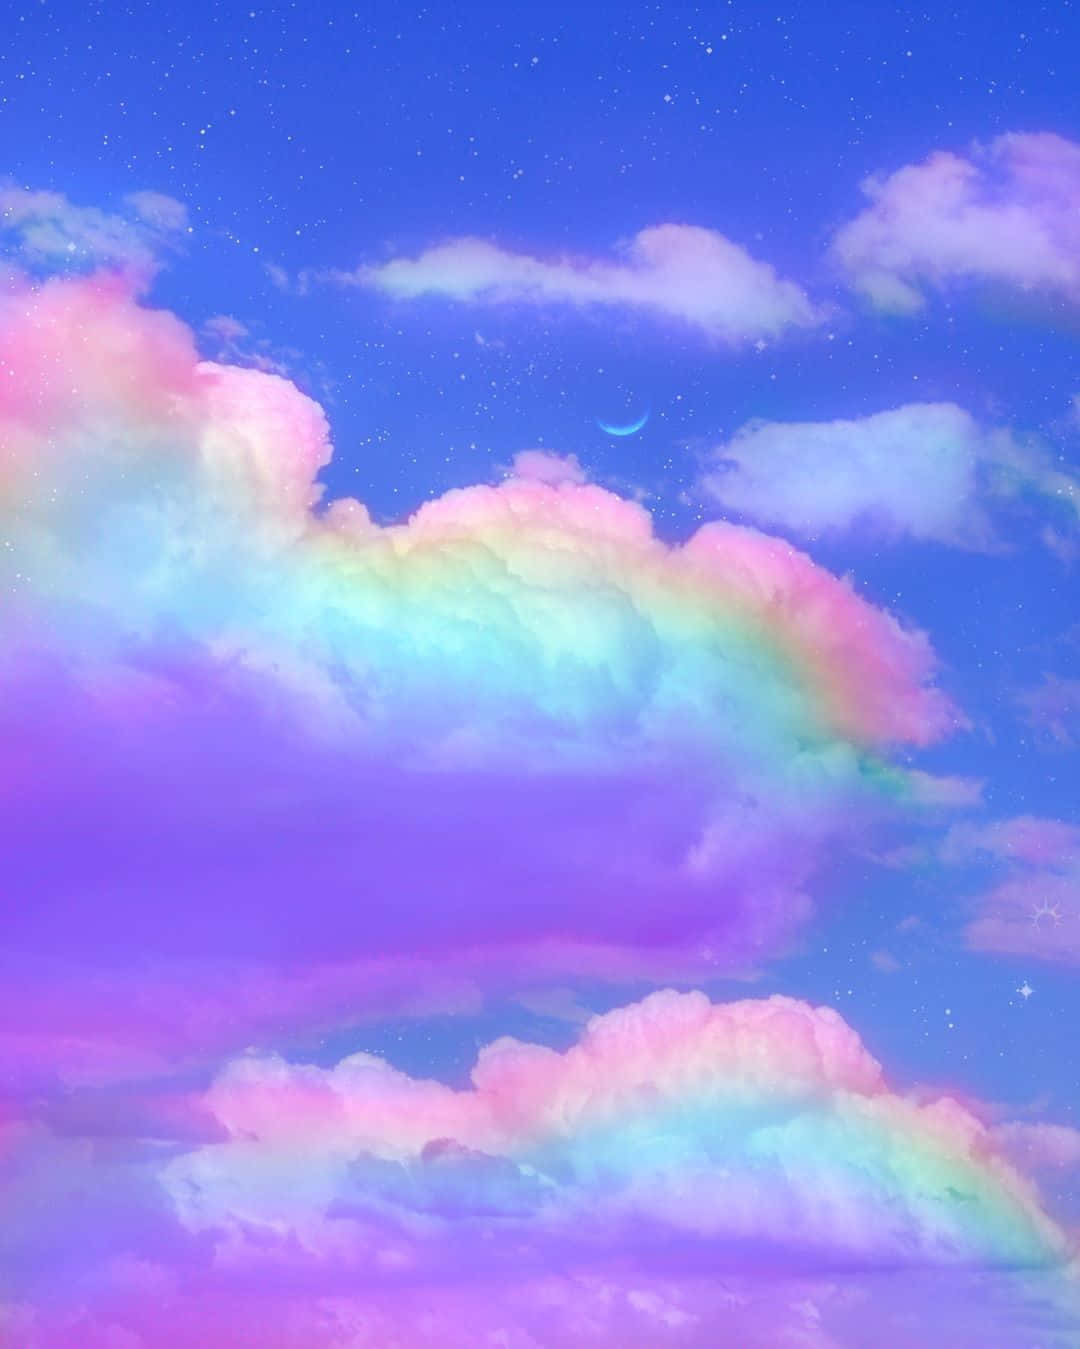 Trippy Aesthetic Cloud With Rainbow Colors Wallpaper